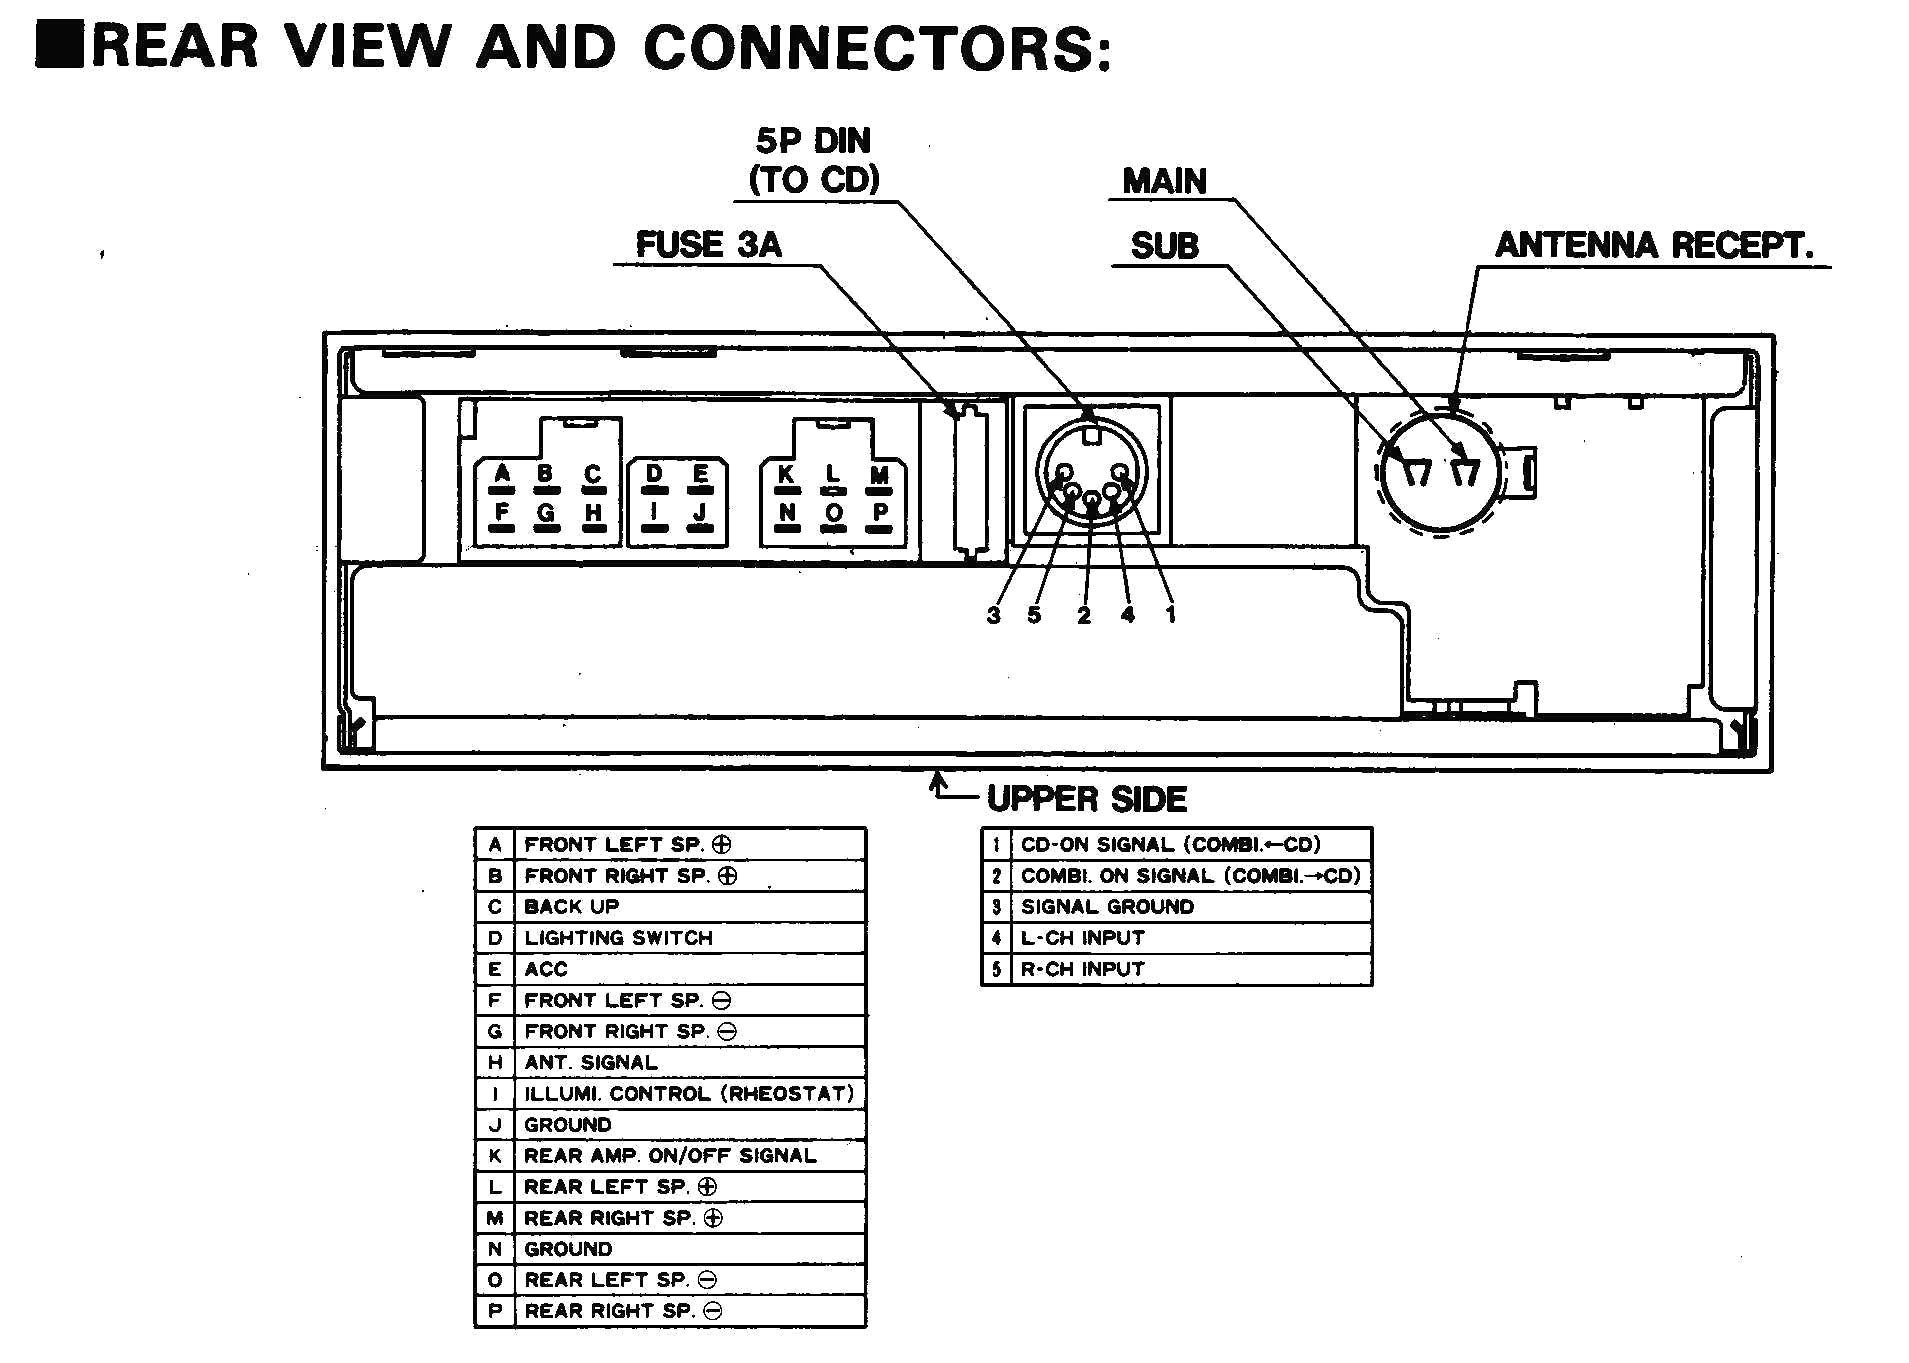 Car Stereo Wiring Diagram With Amplifier Fresh Wiring Diagram For